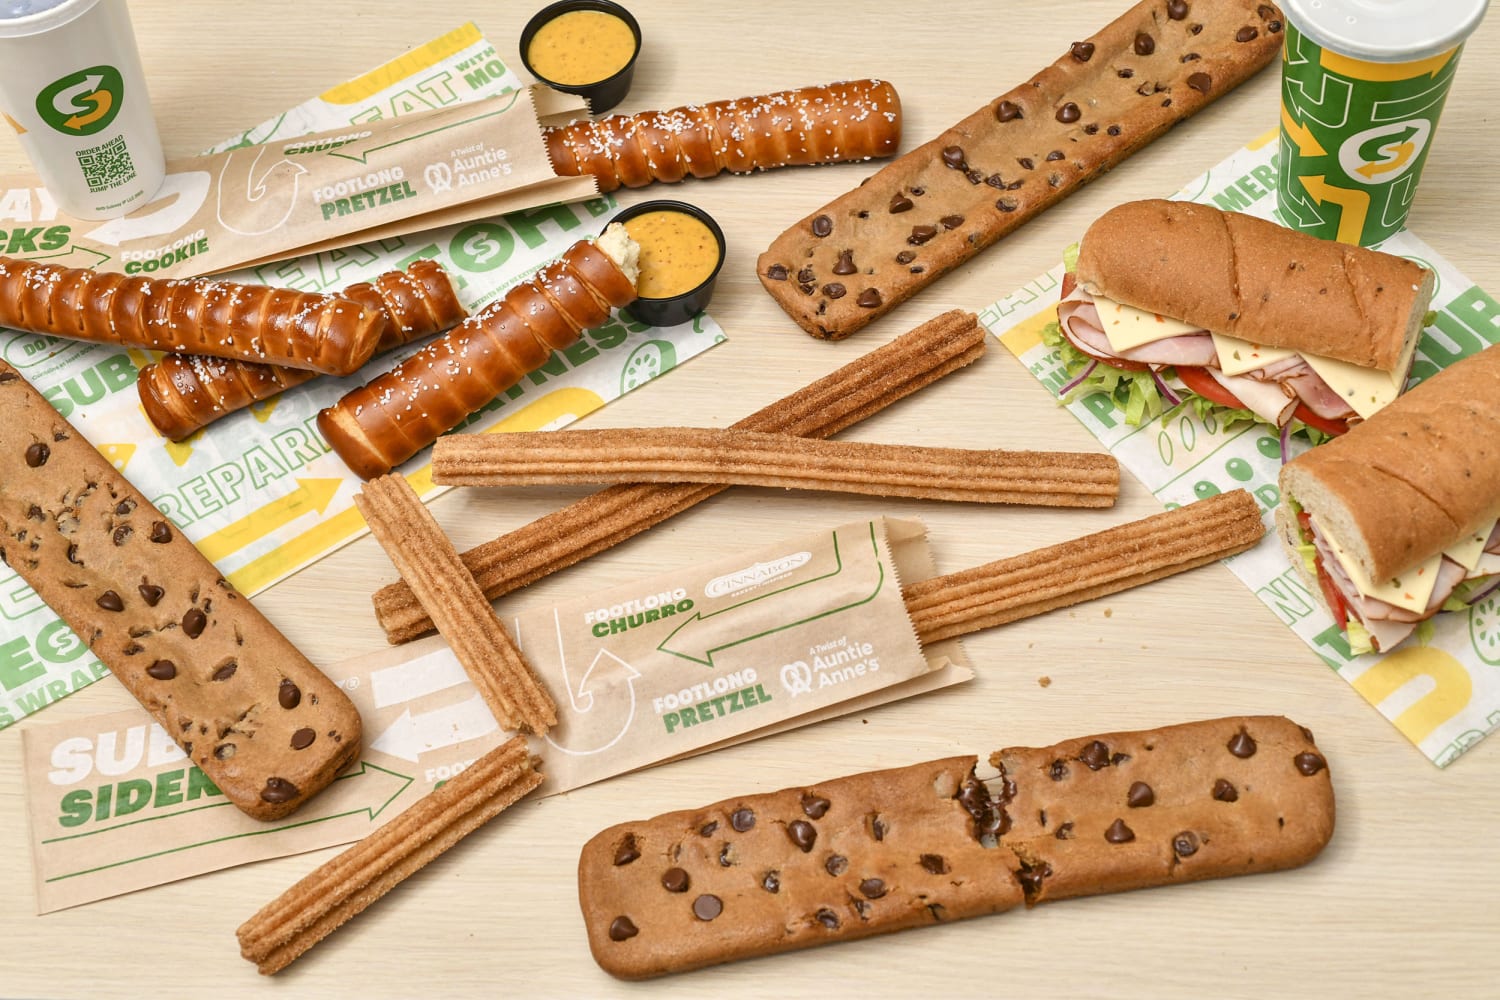 Subway adds three new footlongs to its menu — and none are sandwiches